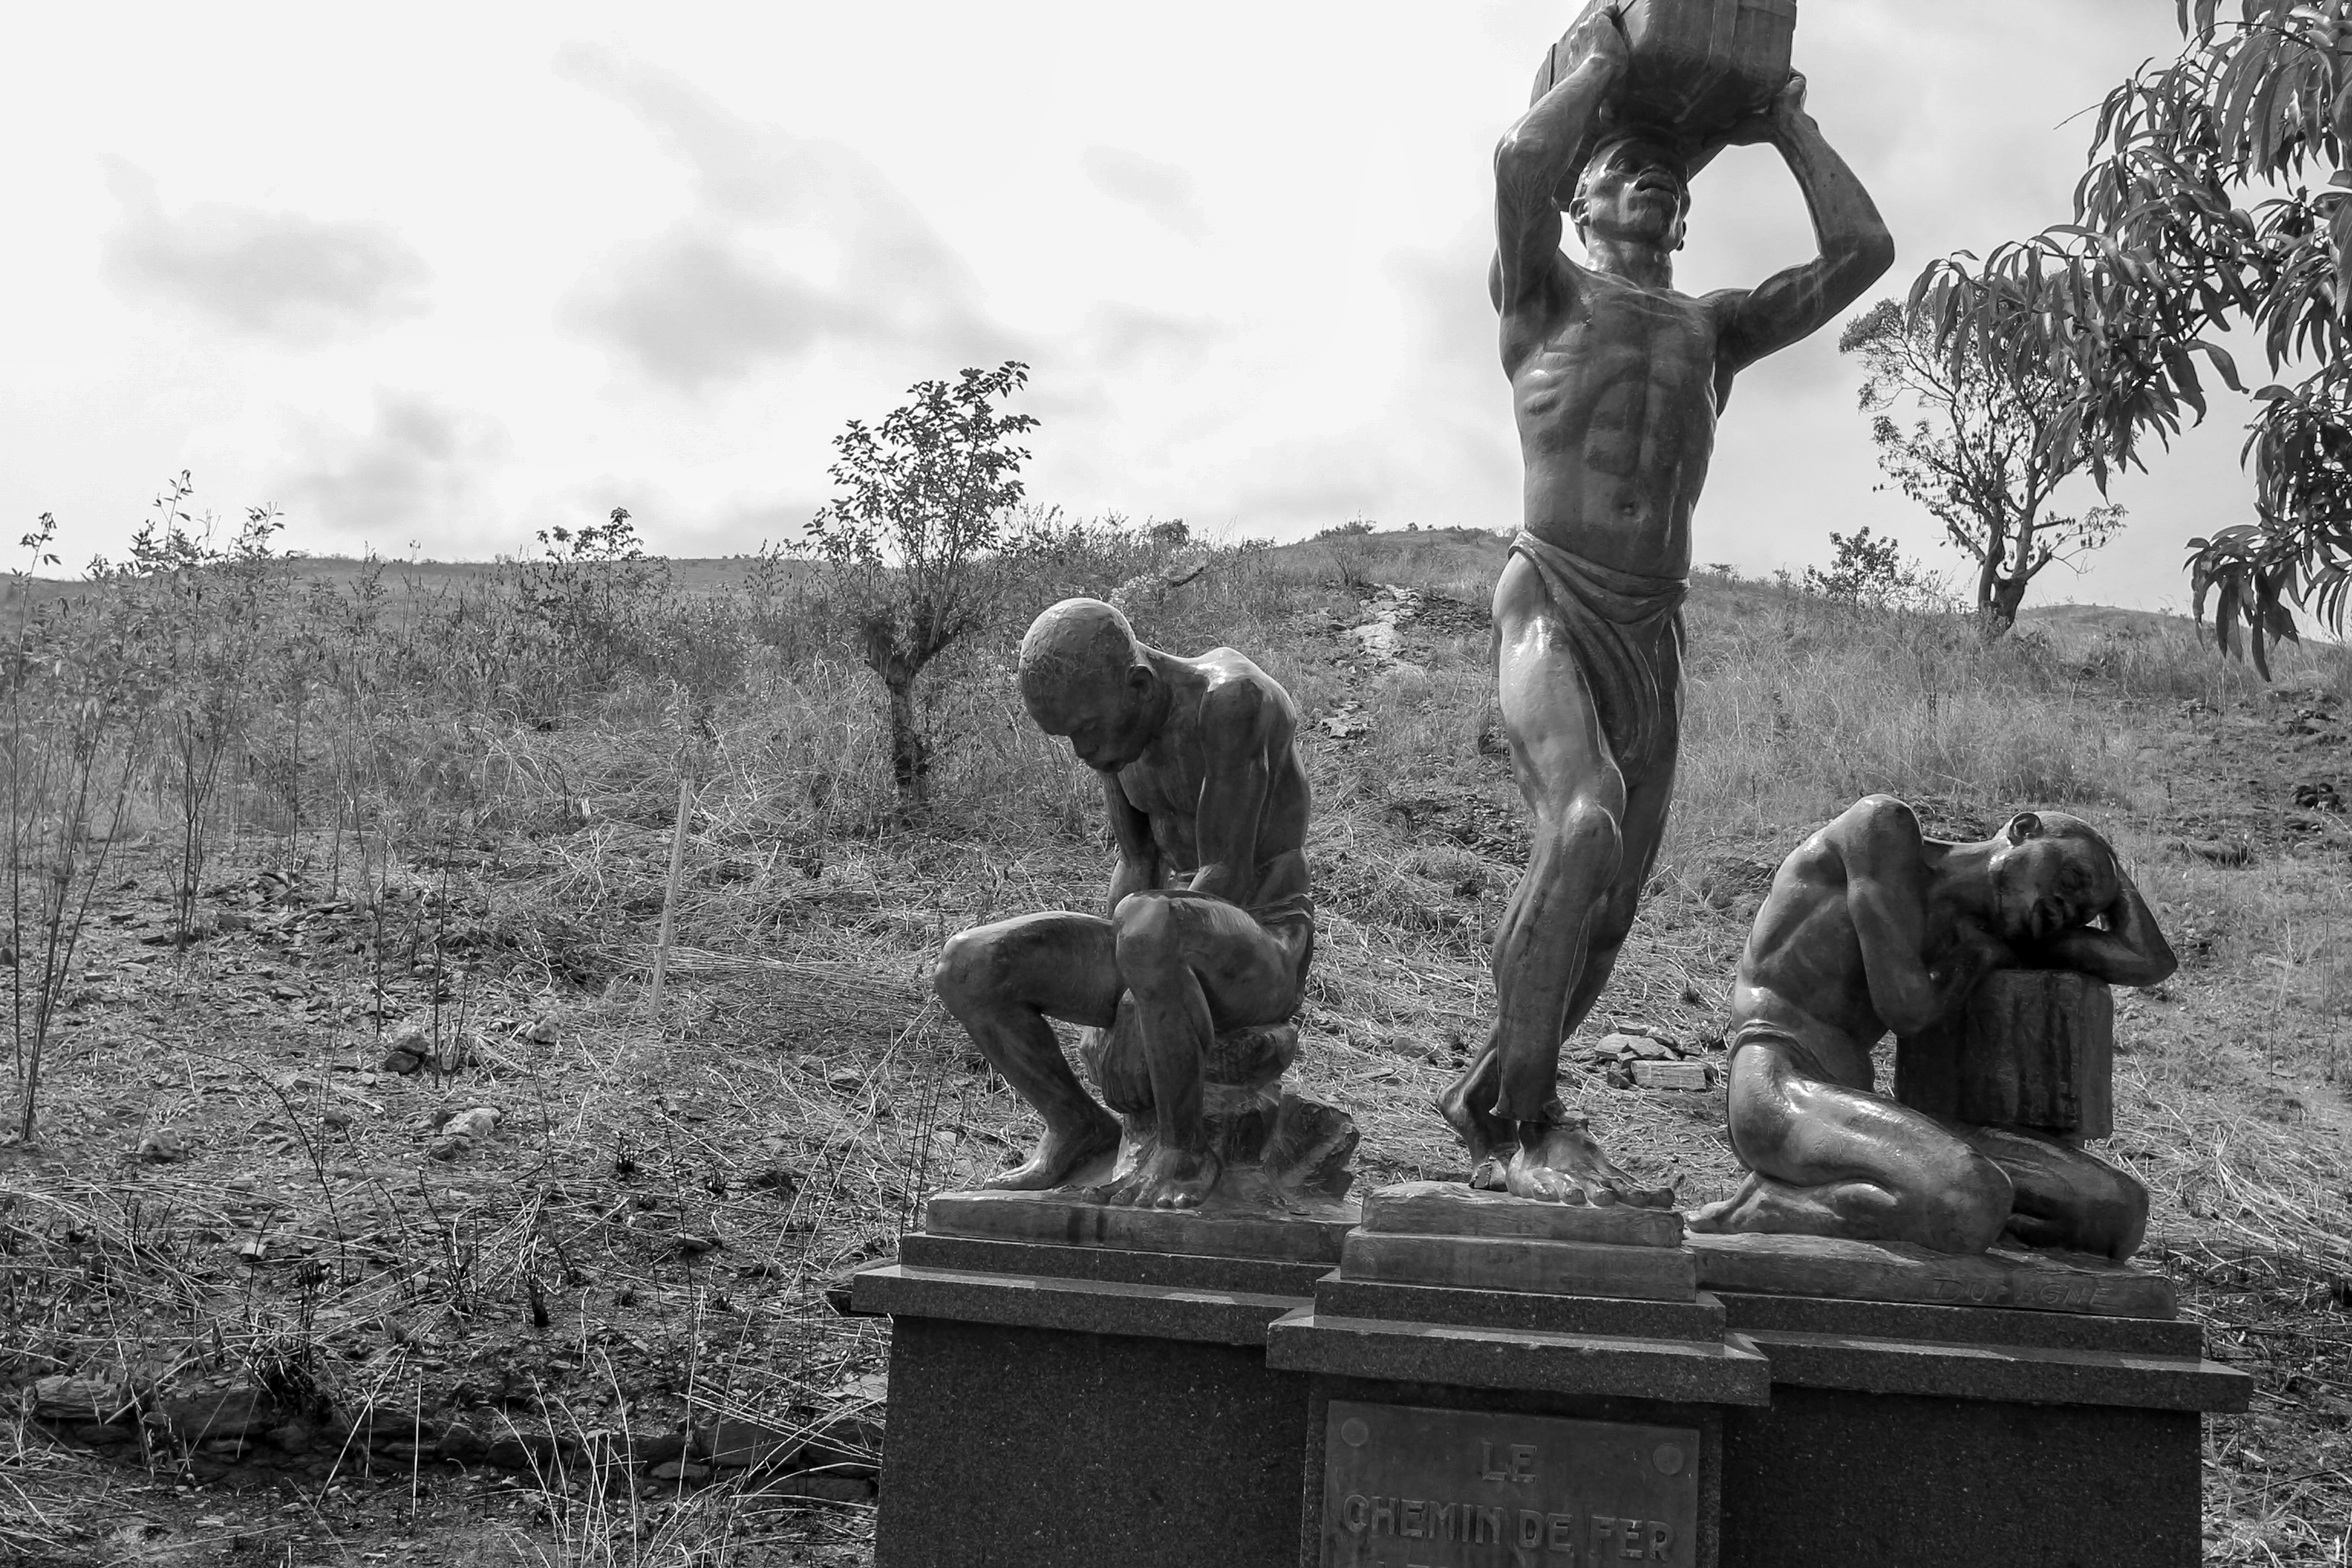  - Statue commemorating workers who died during the construction of the Kinshasa, Matadi railway, Democratic Republic of Congo, 2003